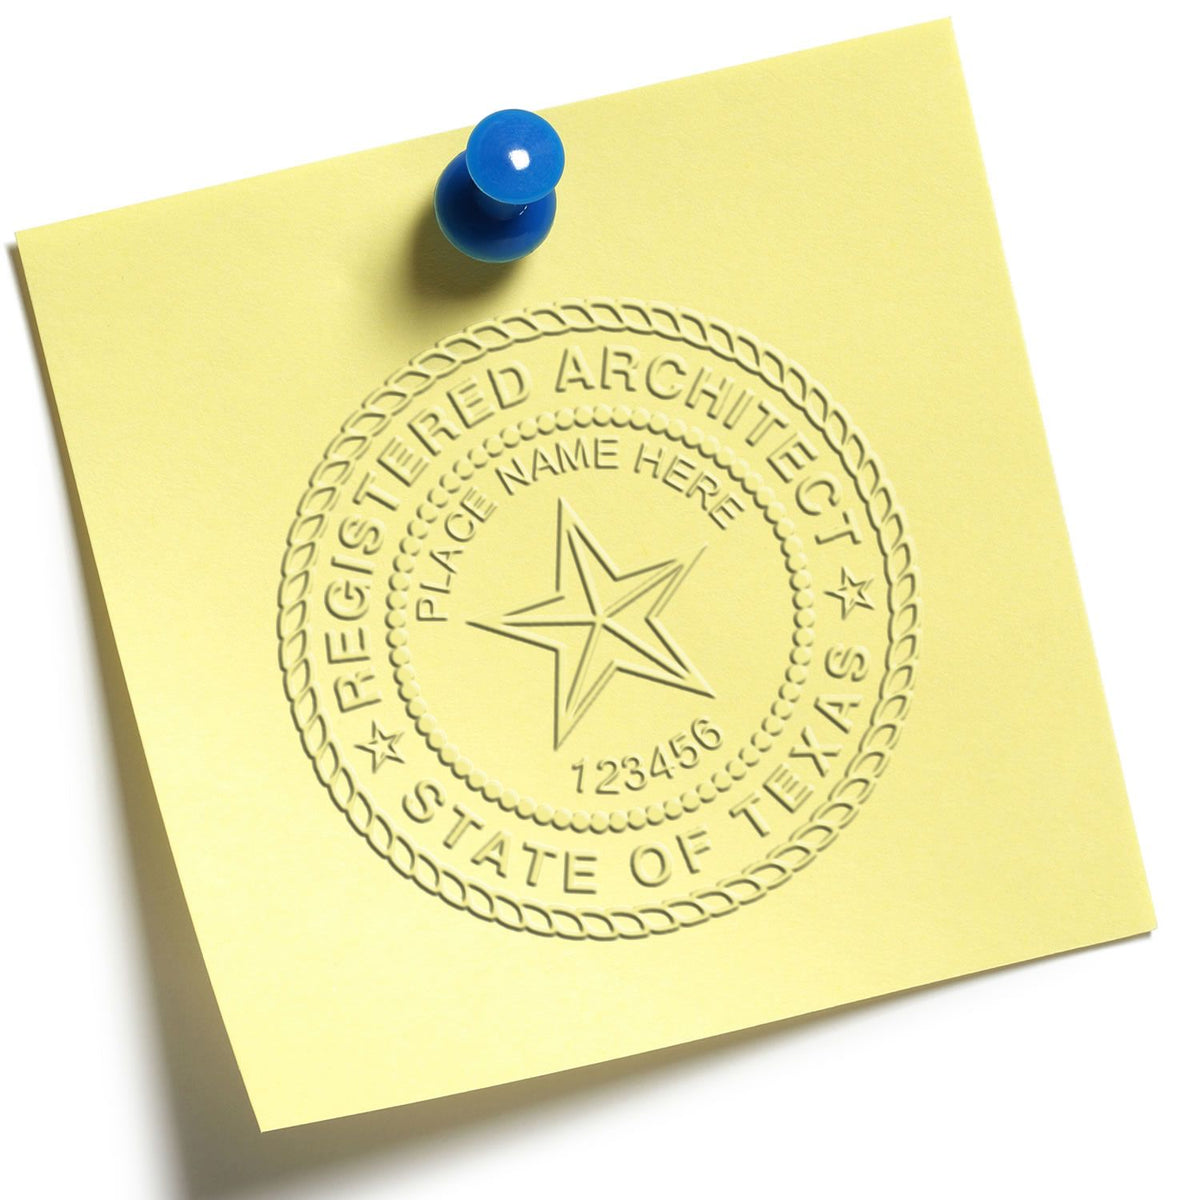 State of Texas Architectural Seal Embosser in use photo showing a stamped imprint of the State of Texas Architectural Seal Embosser